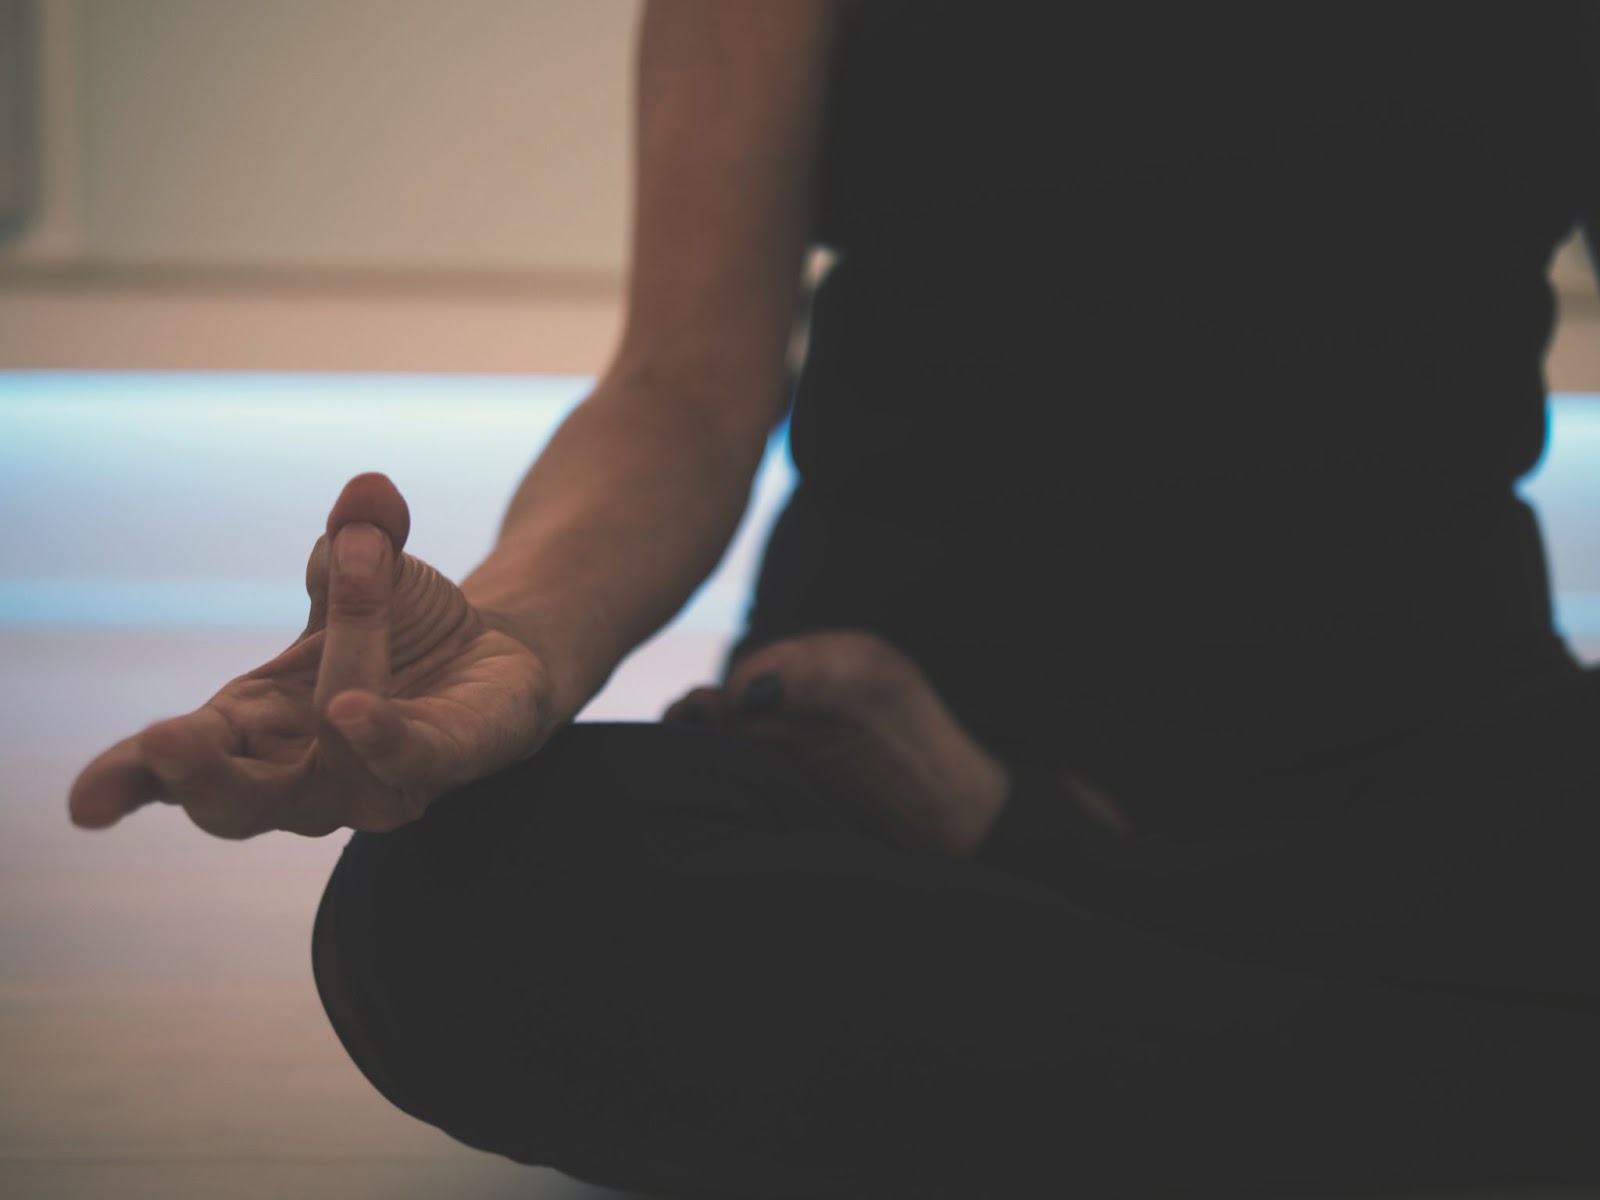 This image shows a person meditating